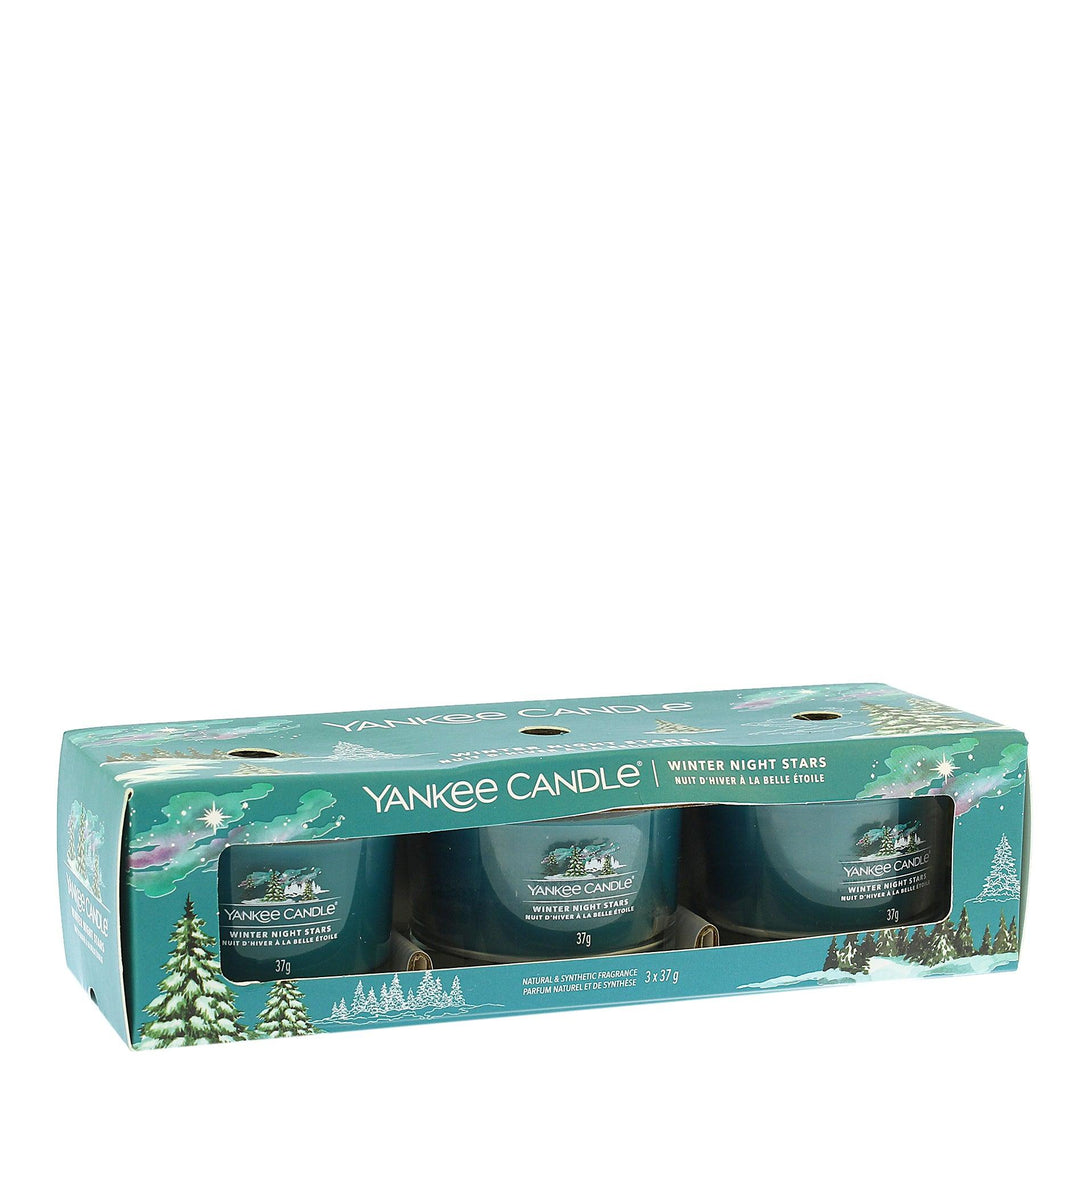 YANKEE CANDLE Winter Night Stars Votive Candle In Glass 3 X 37 G - Parfumby.com